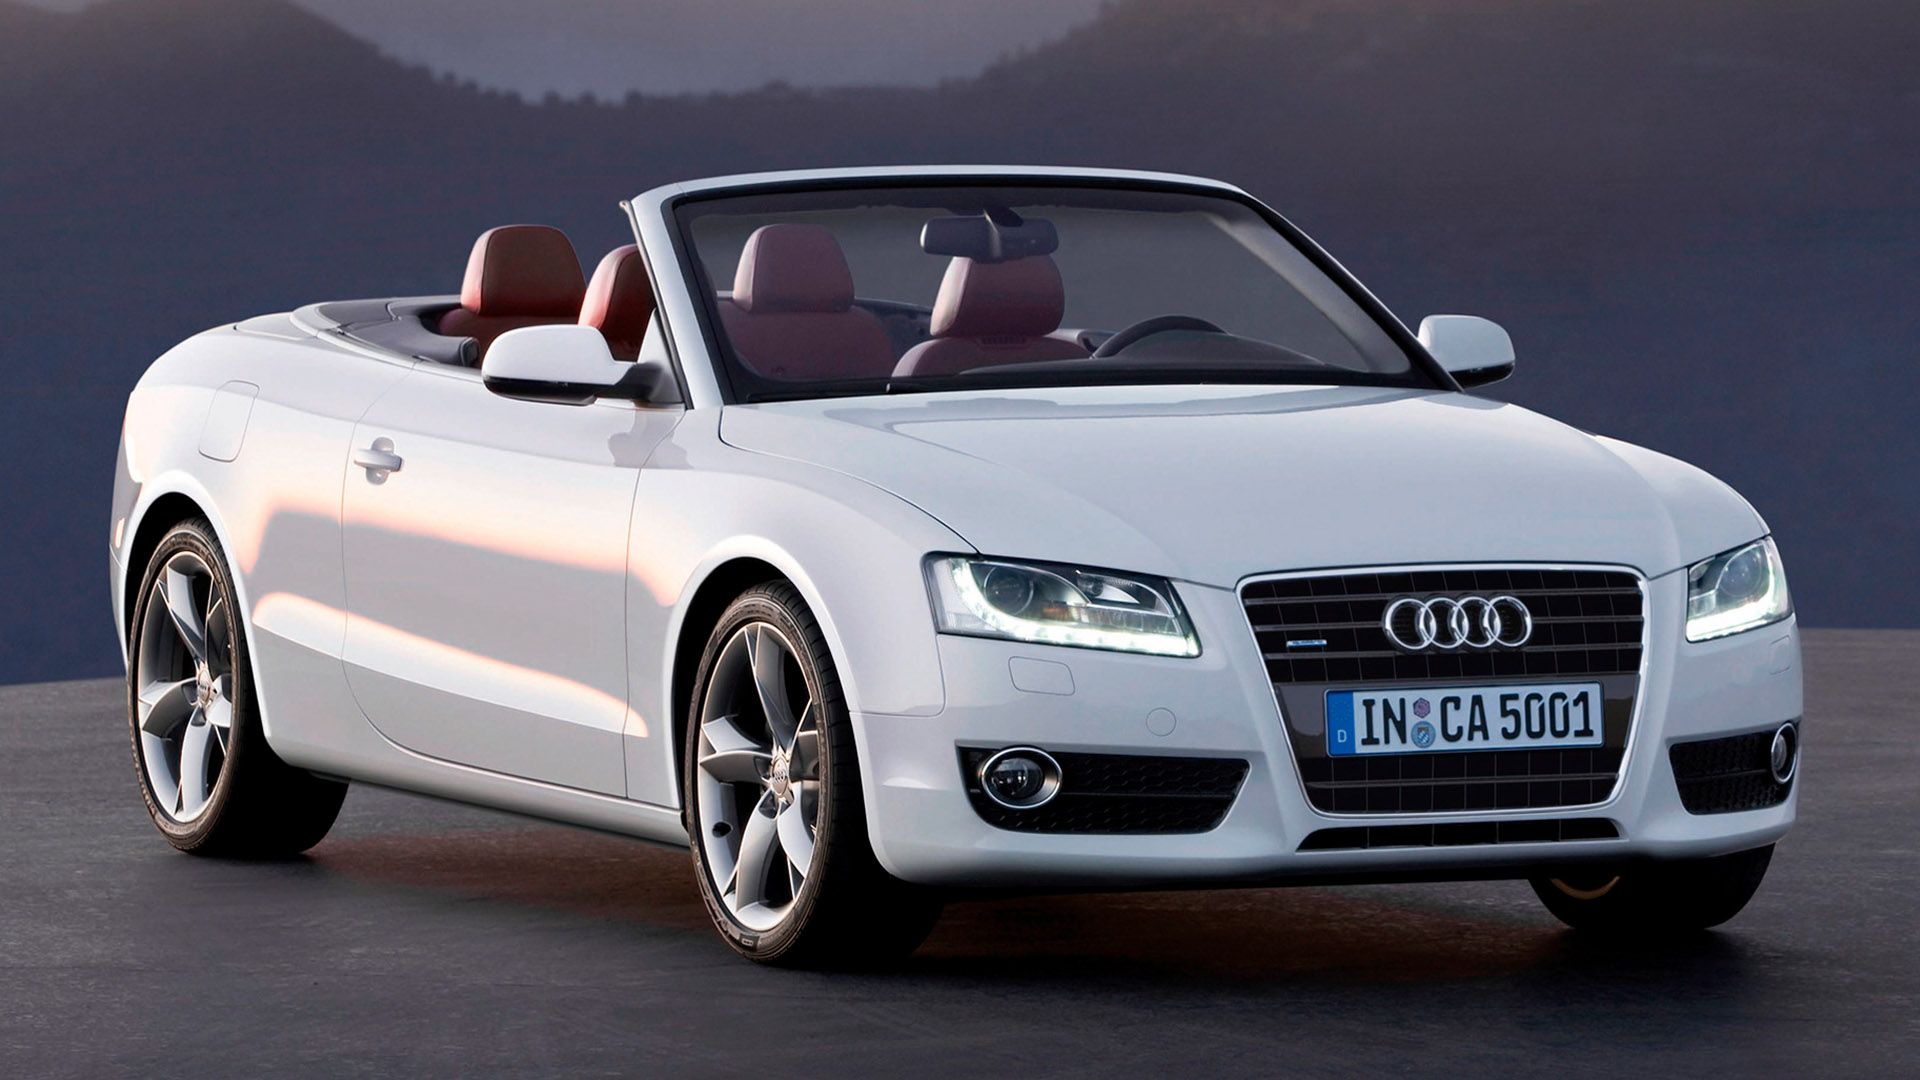 White Audi A5 convertible with open top stands on a slope, forests can be seen in the background